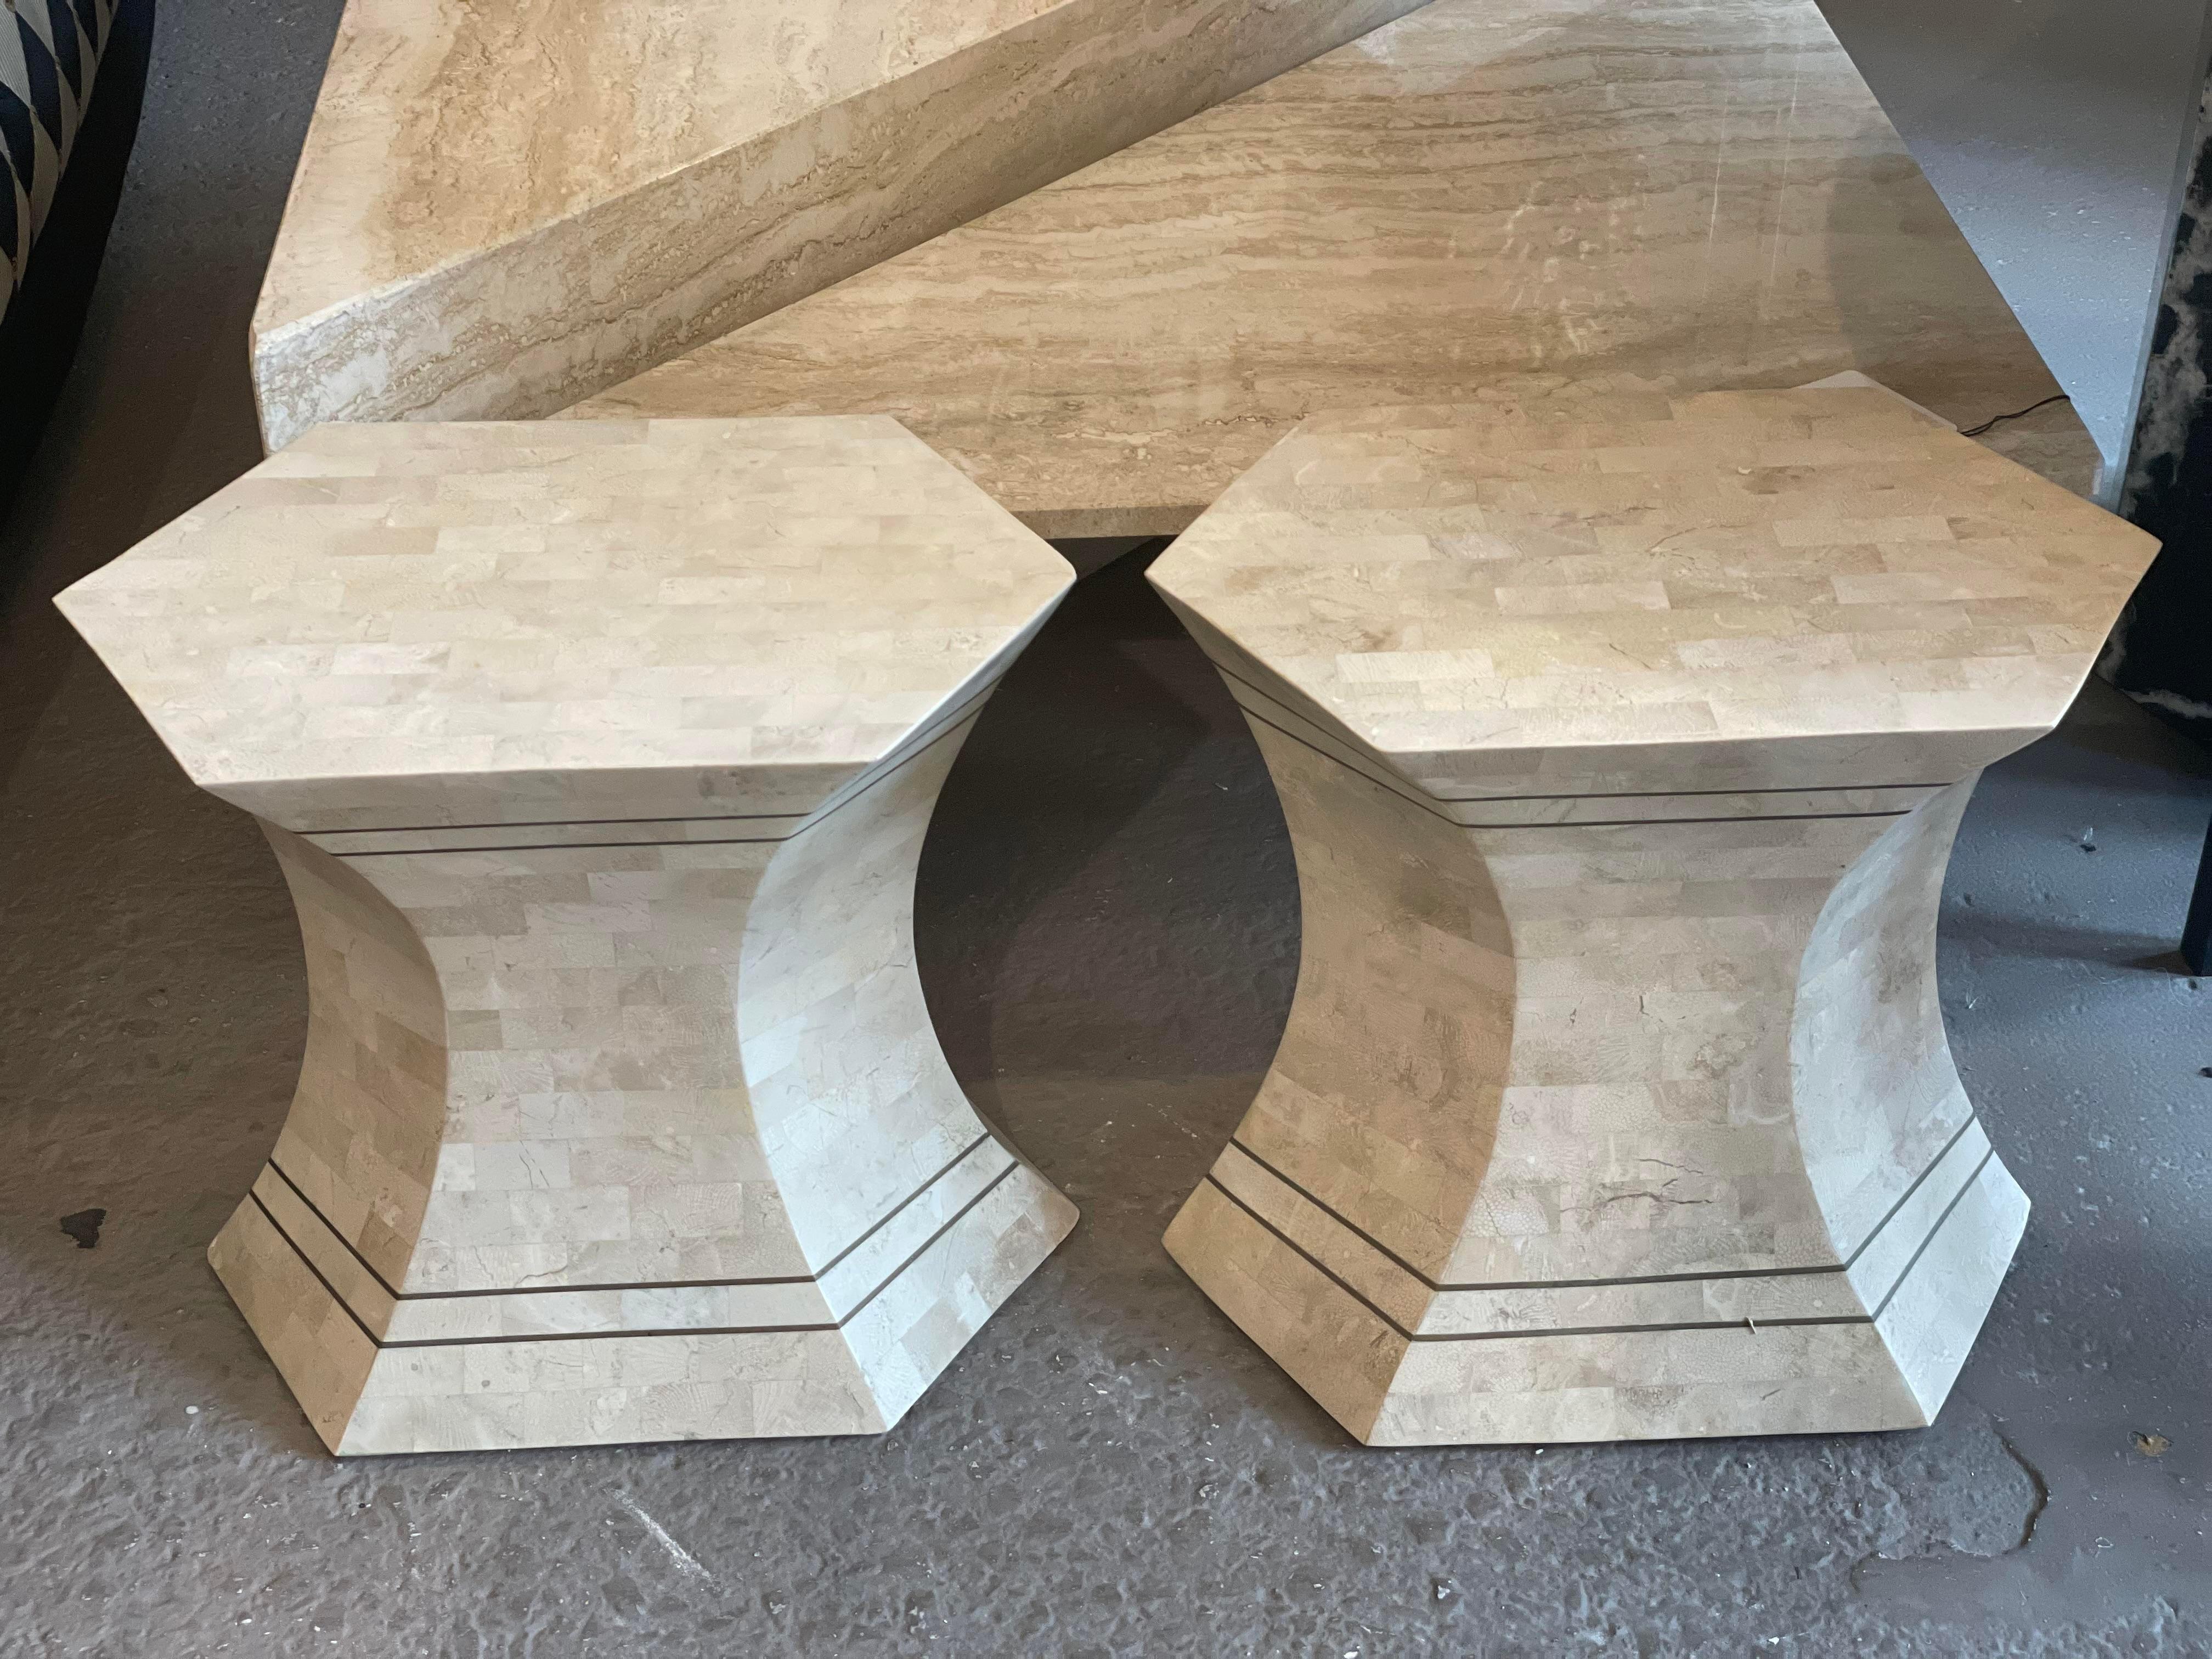 Adorable little sides tables made from tessellated stone with brass detailing. These are in excellent condition and can be used as stools or tables.